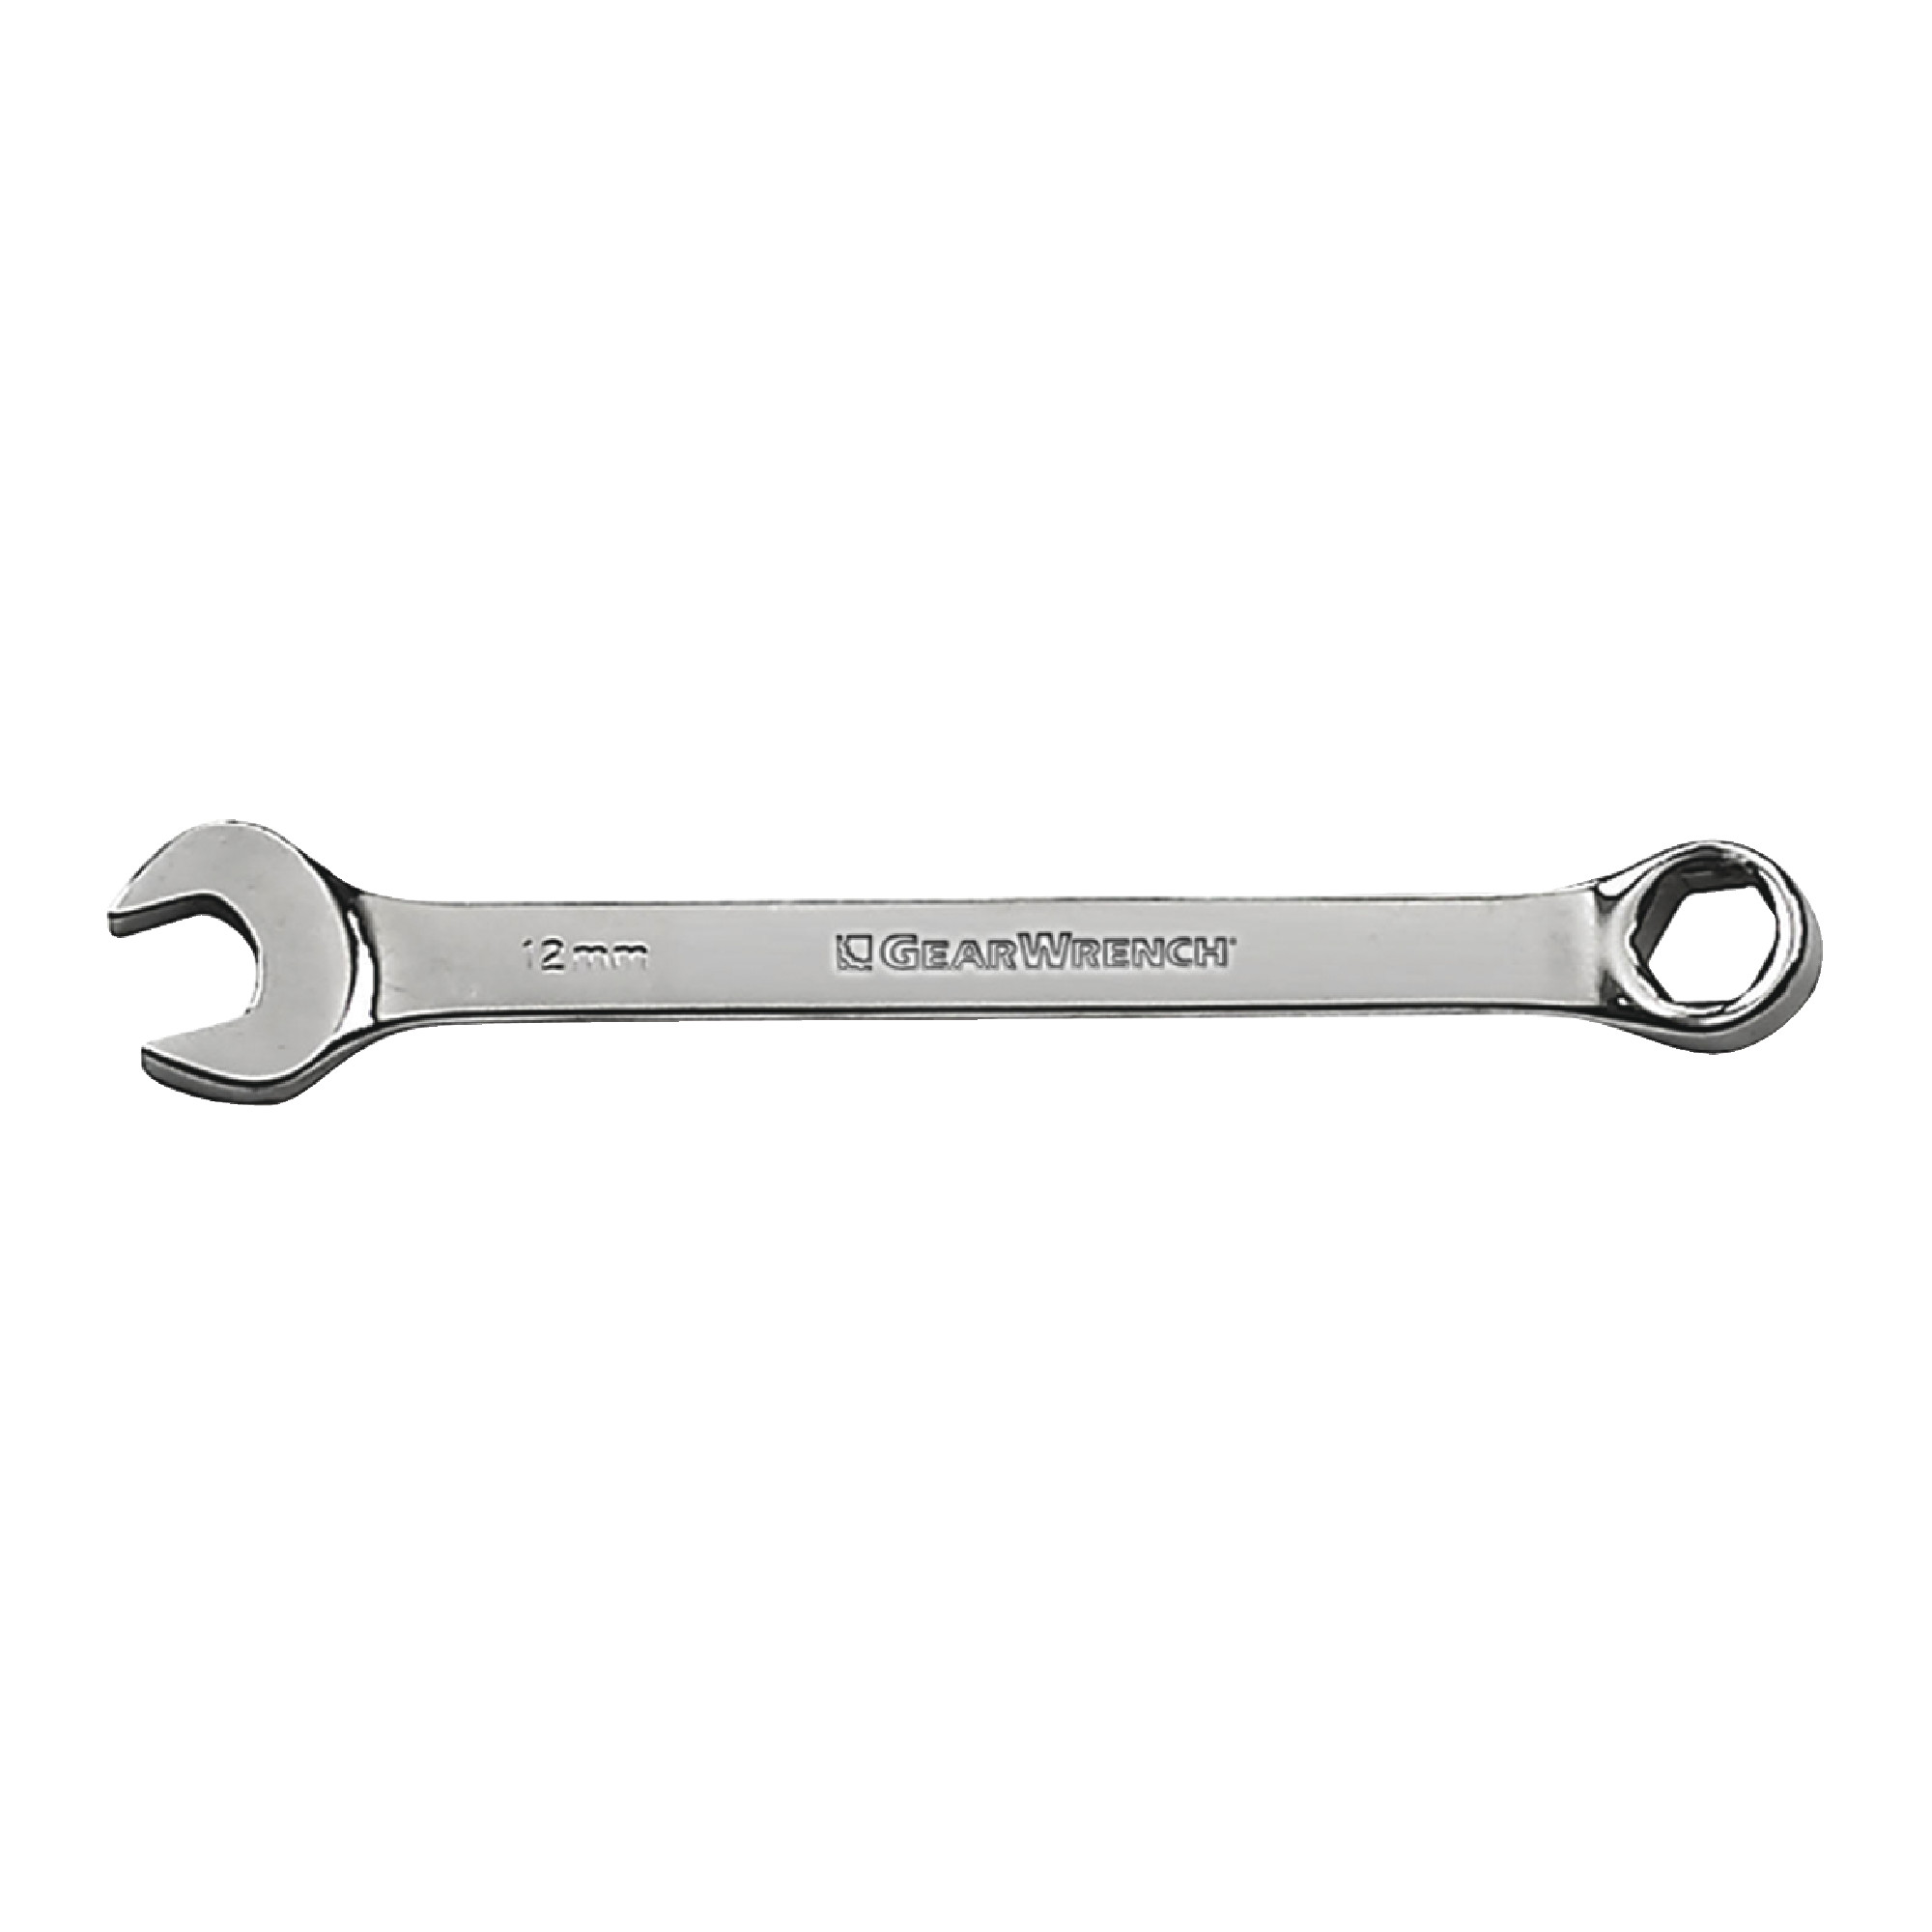 6mm 6 Point Combination Wrench